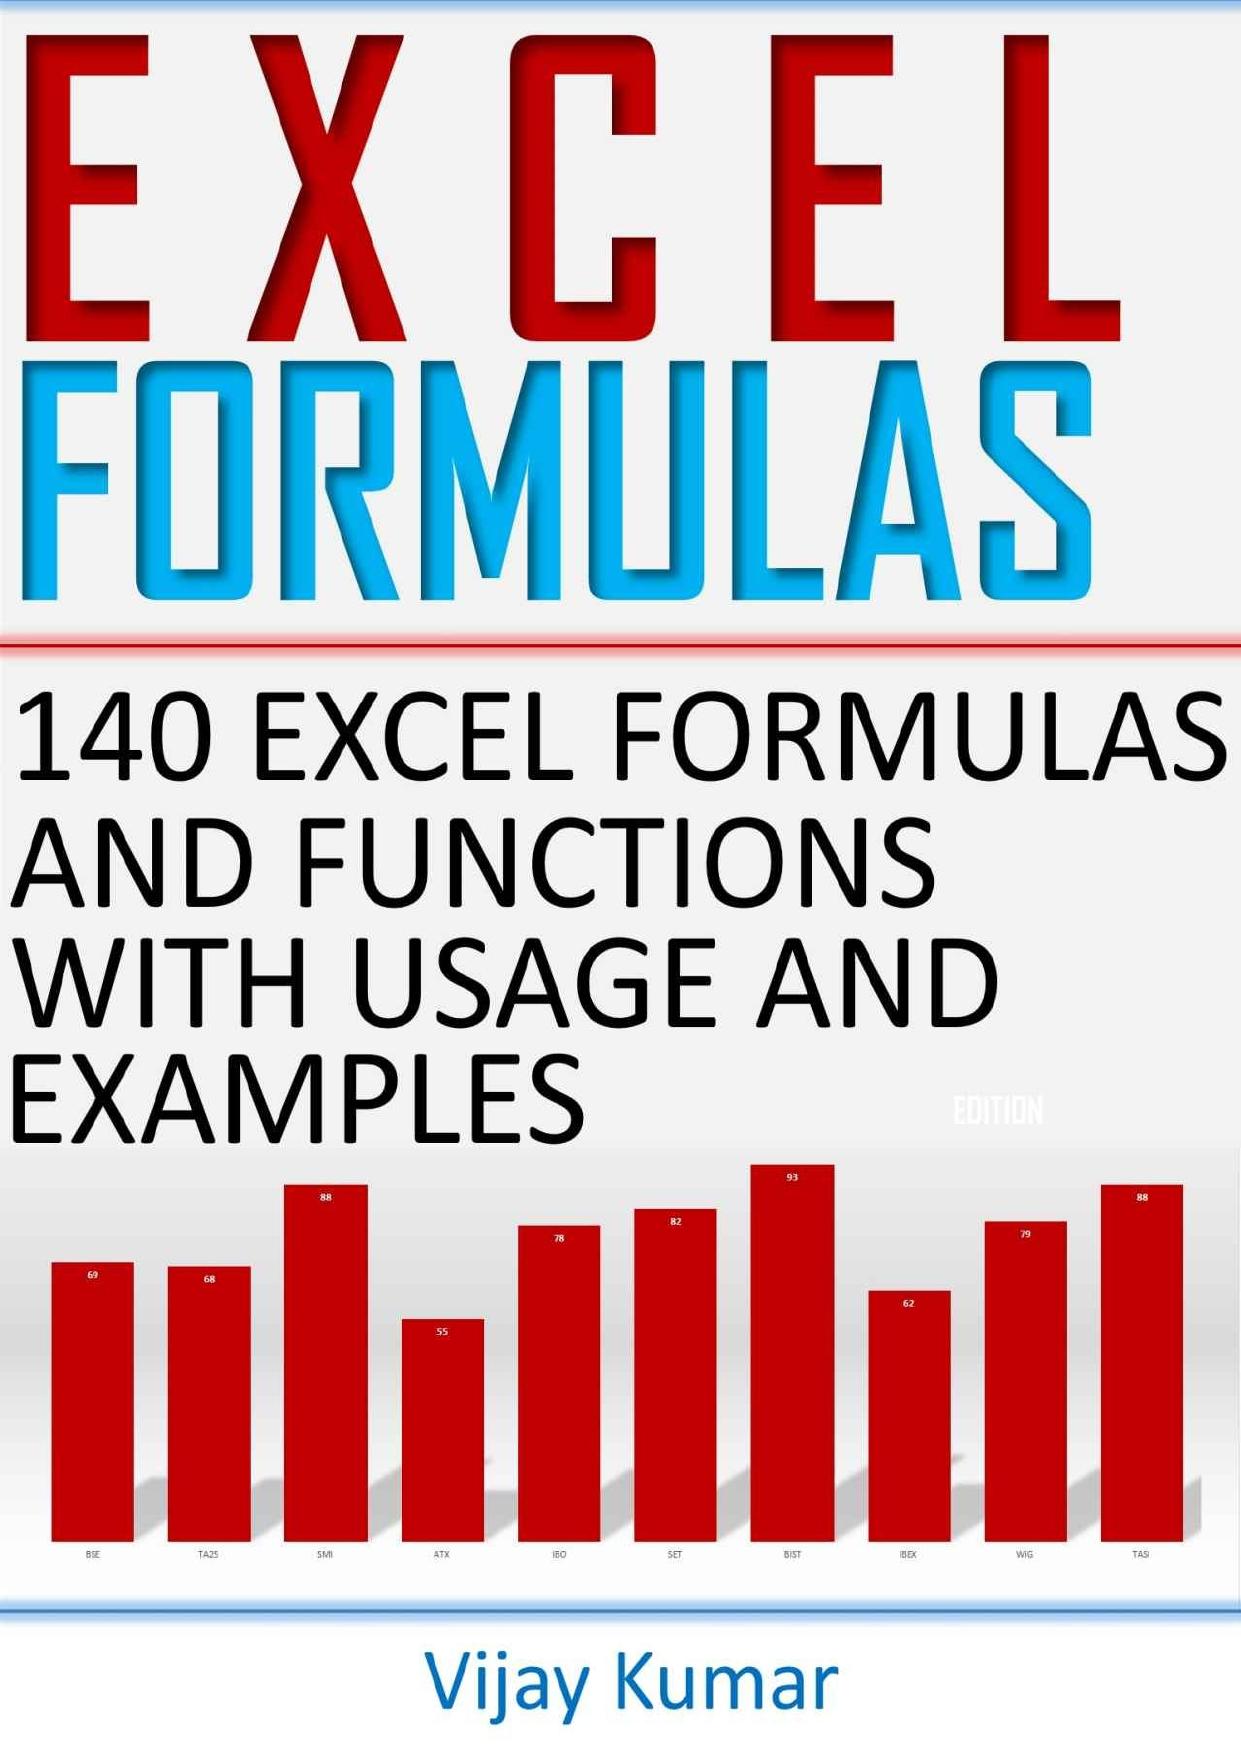 Excel Formulas: 140 Excel Formulas and Functions with usage and examples